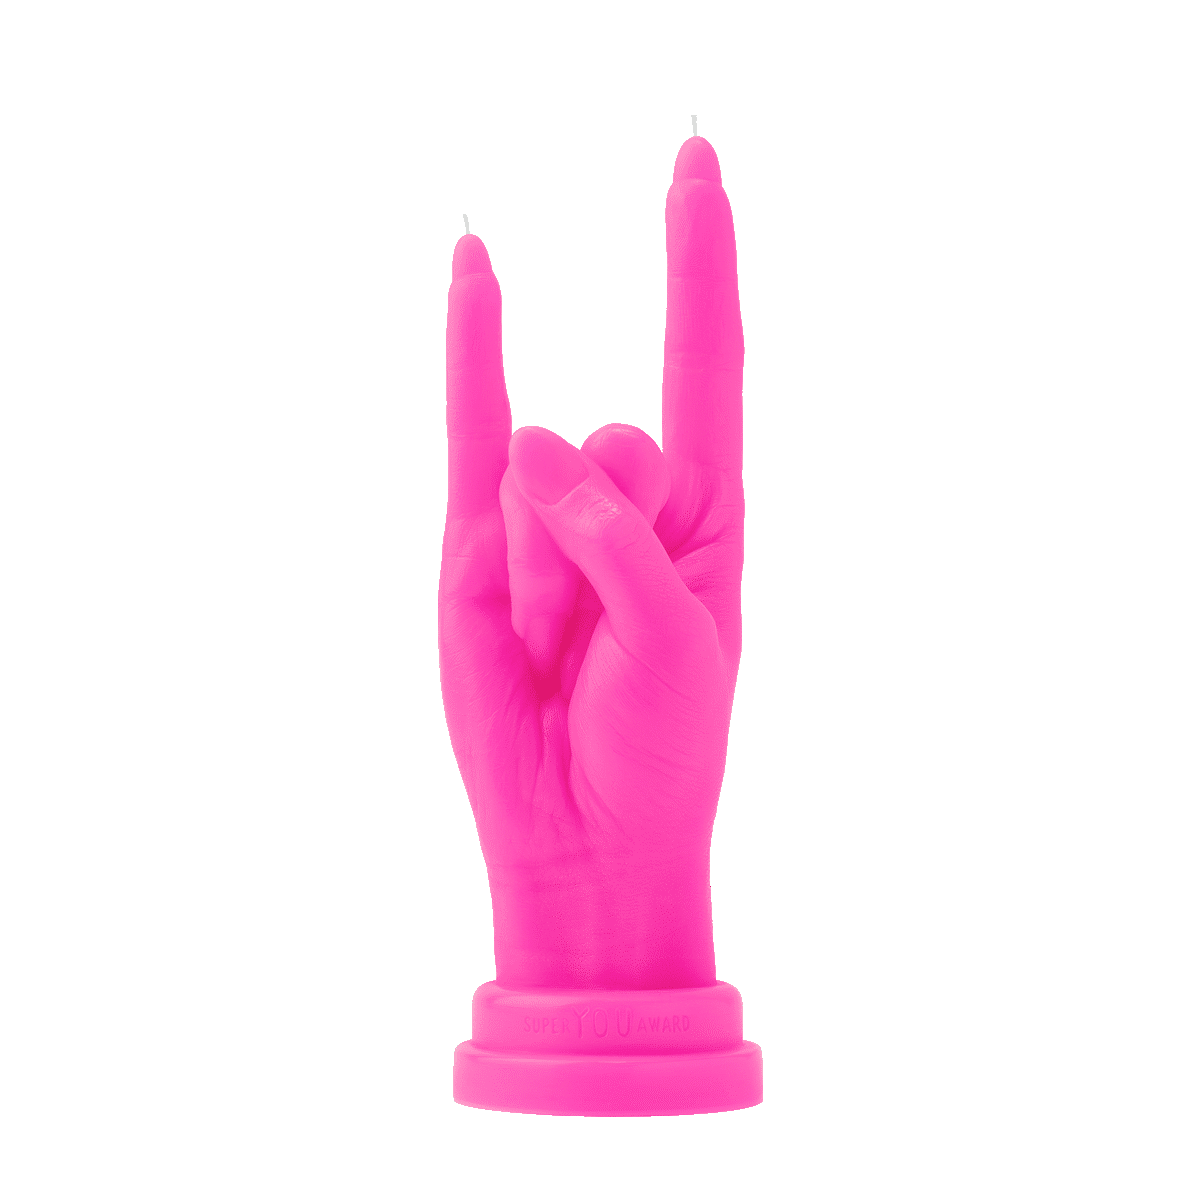 ⚡︎-SUPER-YOU-AWARD-cool-unique-gift-idea-empowering-uniqueness-ROCK-ON-hand-gesture-collectible-decorative-exclusive-neon-pink-candle-YOU-ROCK-0-Aivaras-Simonis-photo